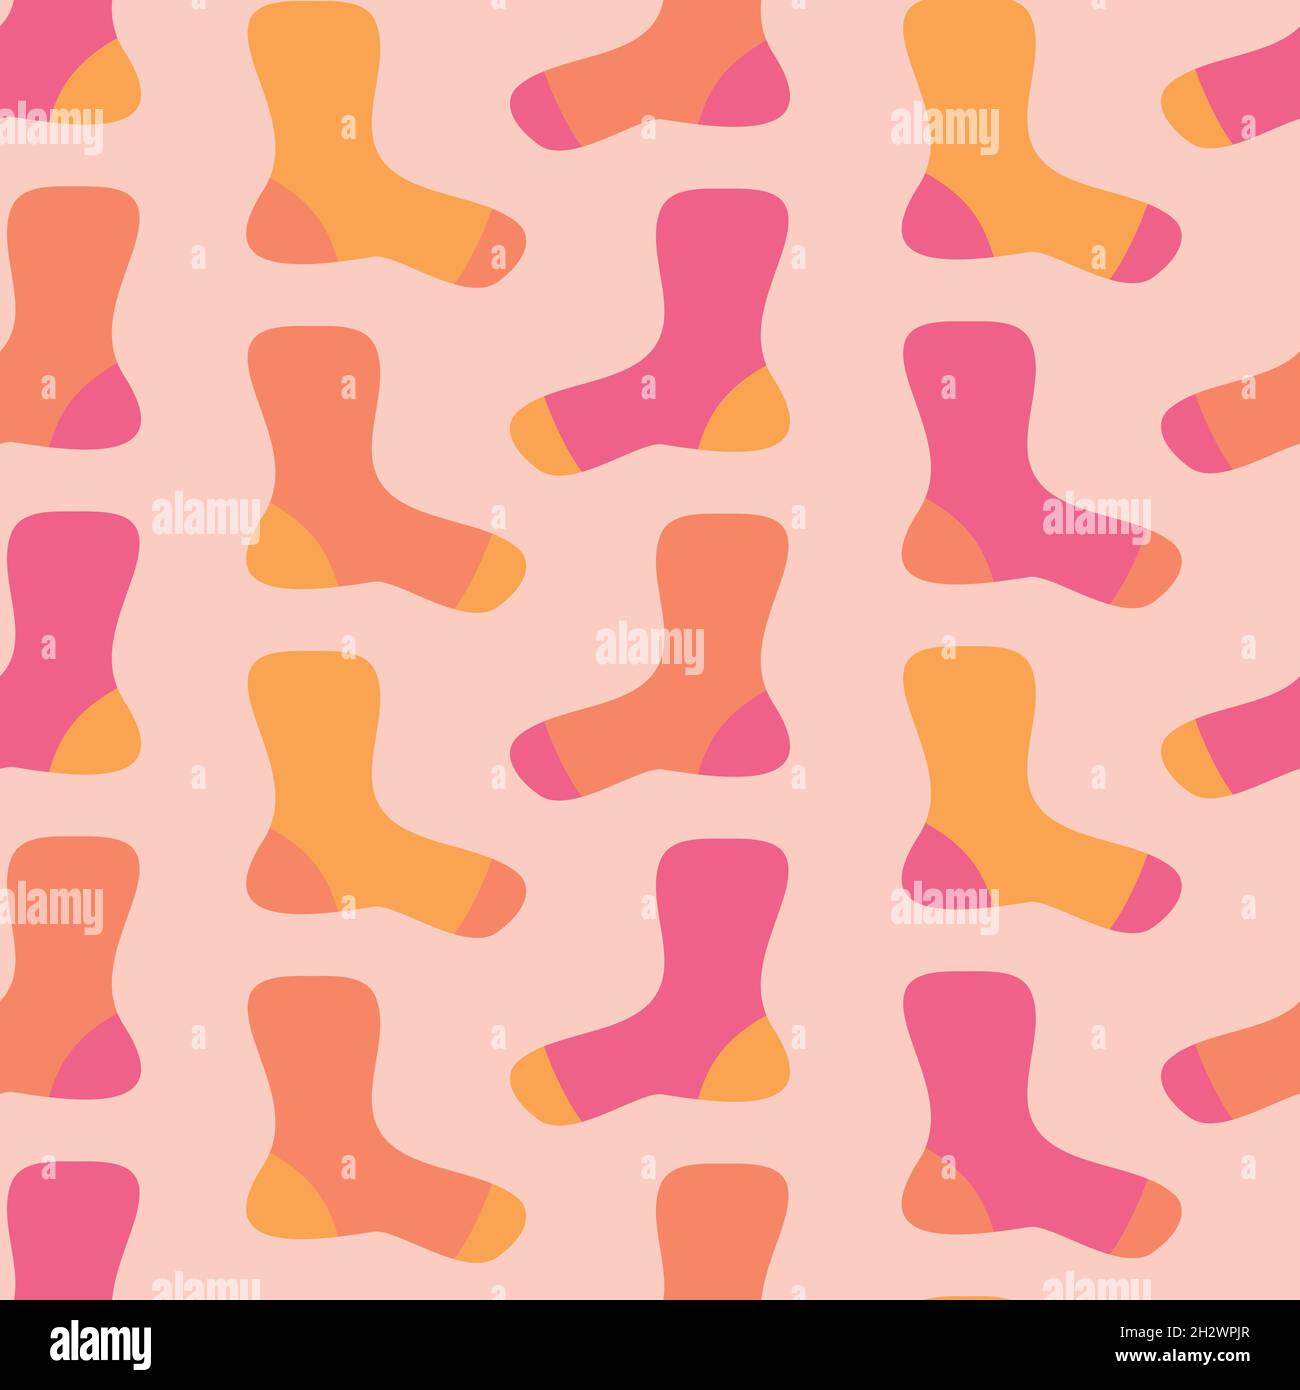 Vector seamless pattern with bright colors socks. Design with hand drawn socks. Stock Vector